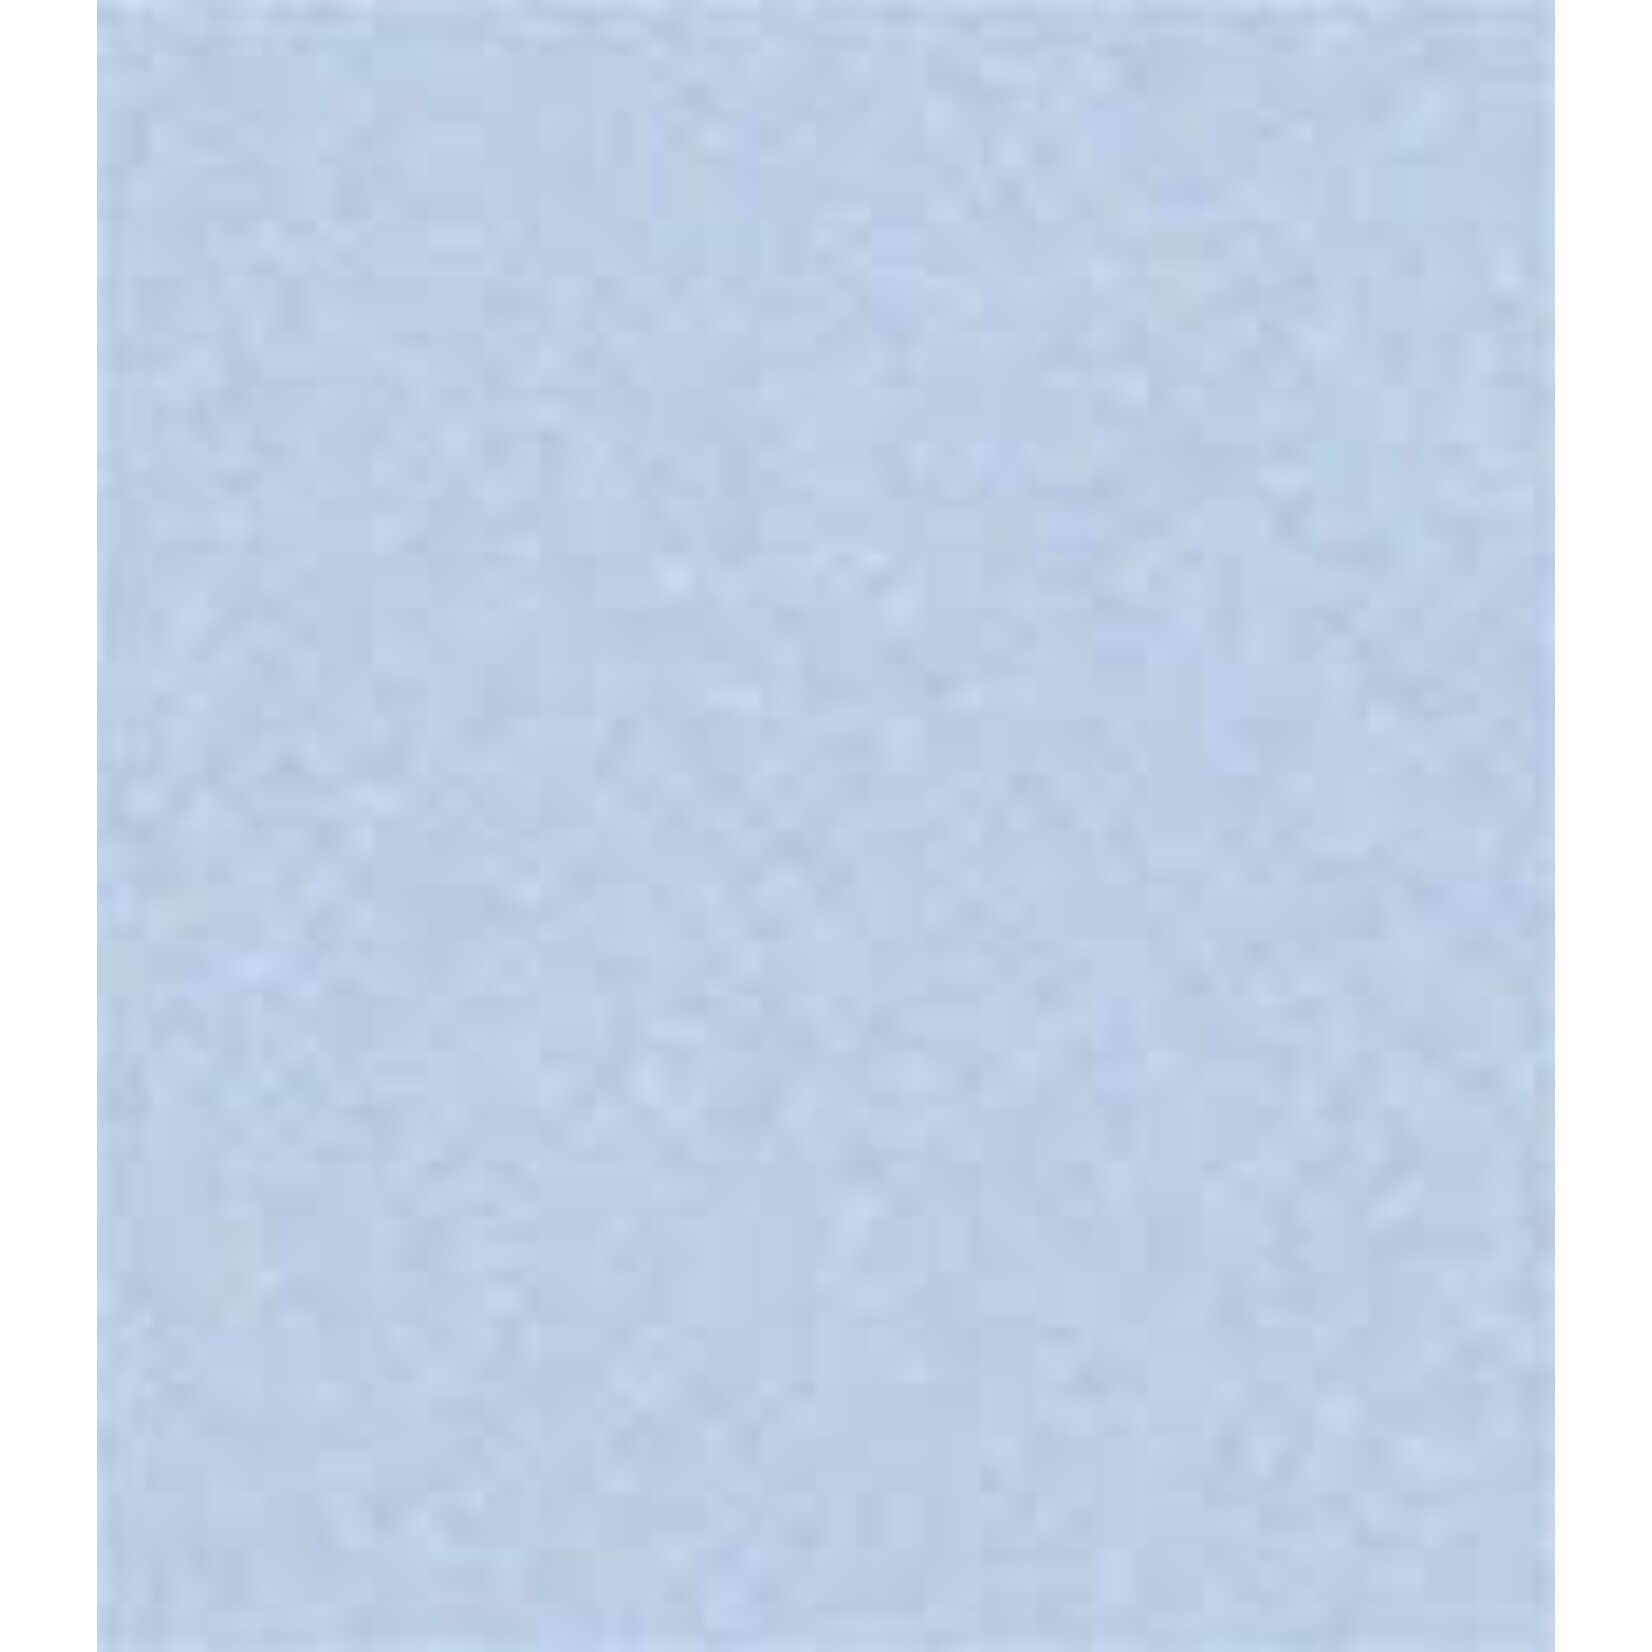 BROADCLOTH 80% POLYESTER / 20% COTTON - PER METER - LIGHT ICE BLUE